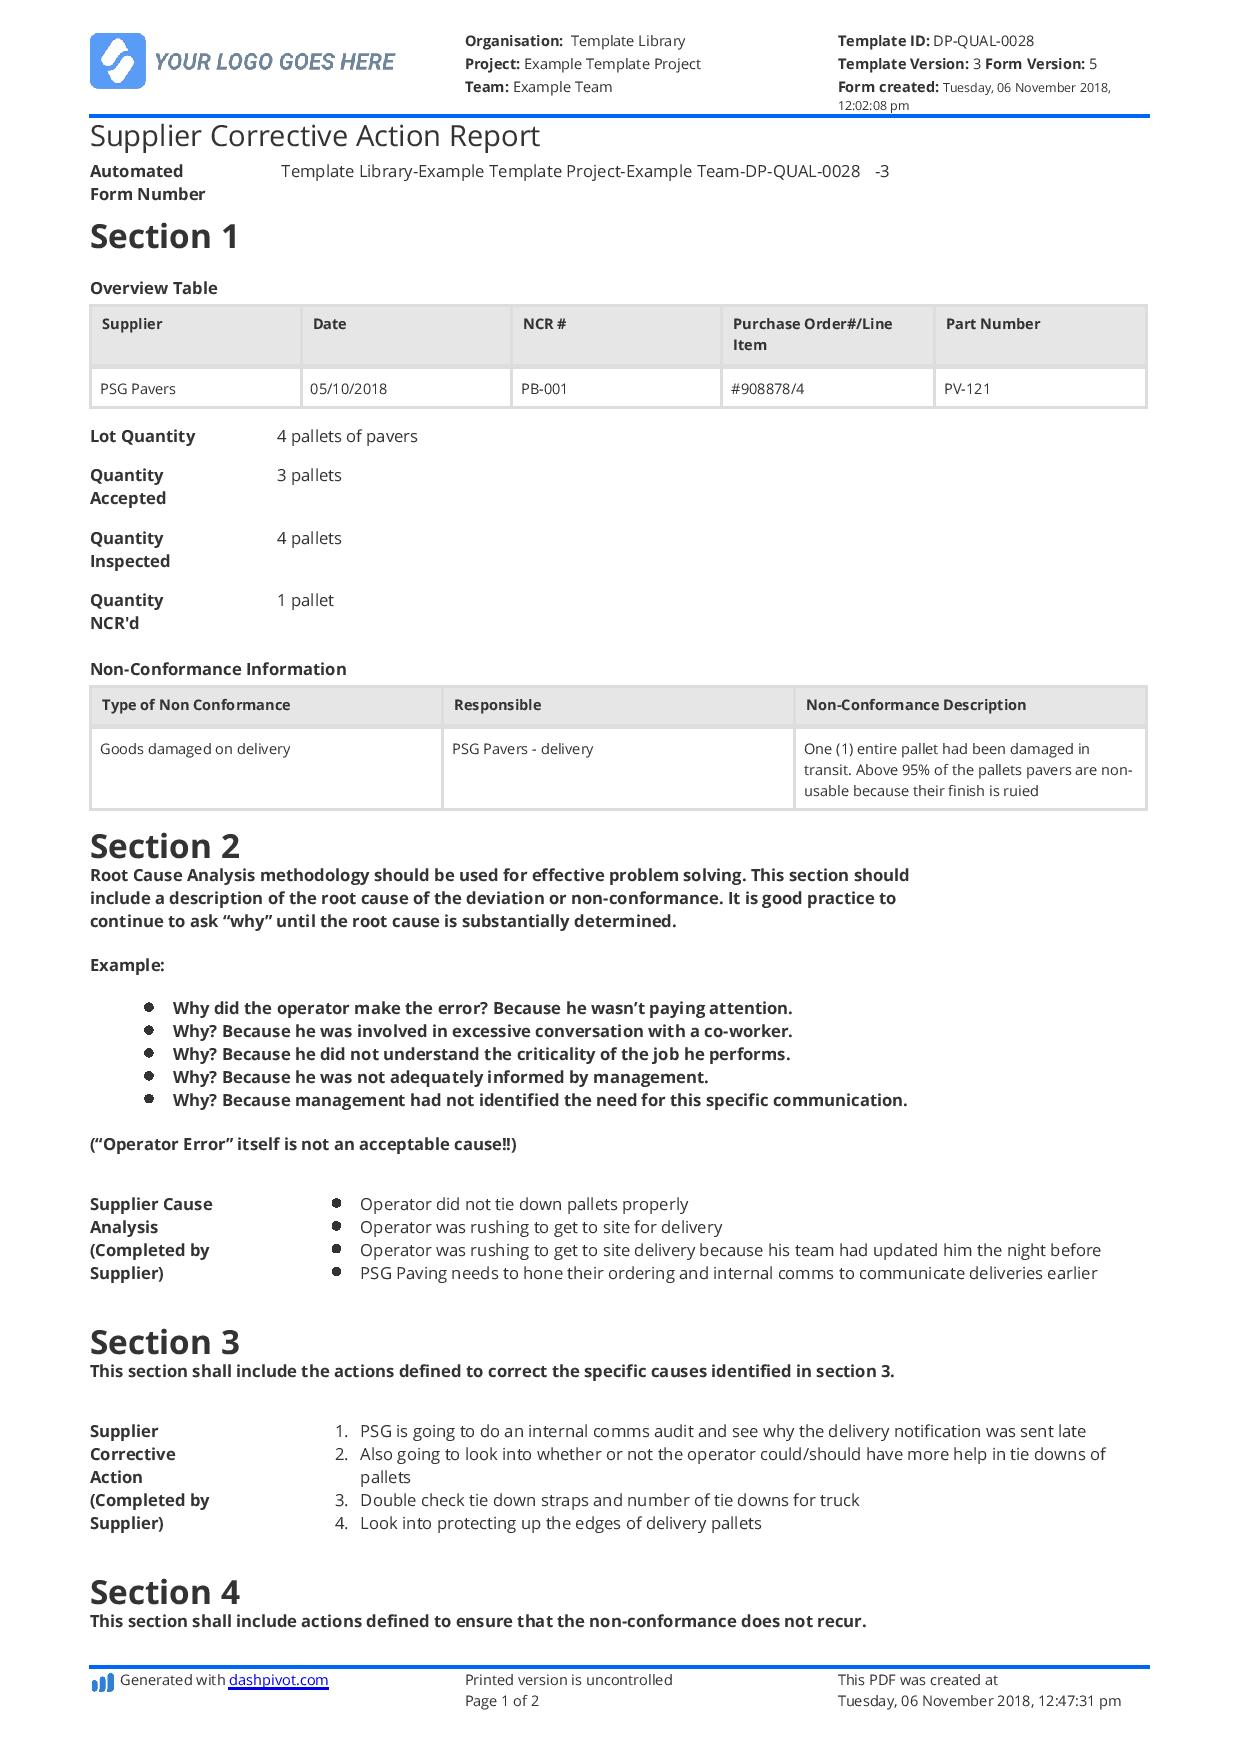 Supplier Corrective Action Report template: Improve your SCAR process In Corrective Action Report Template